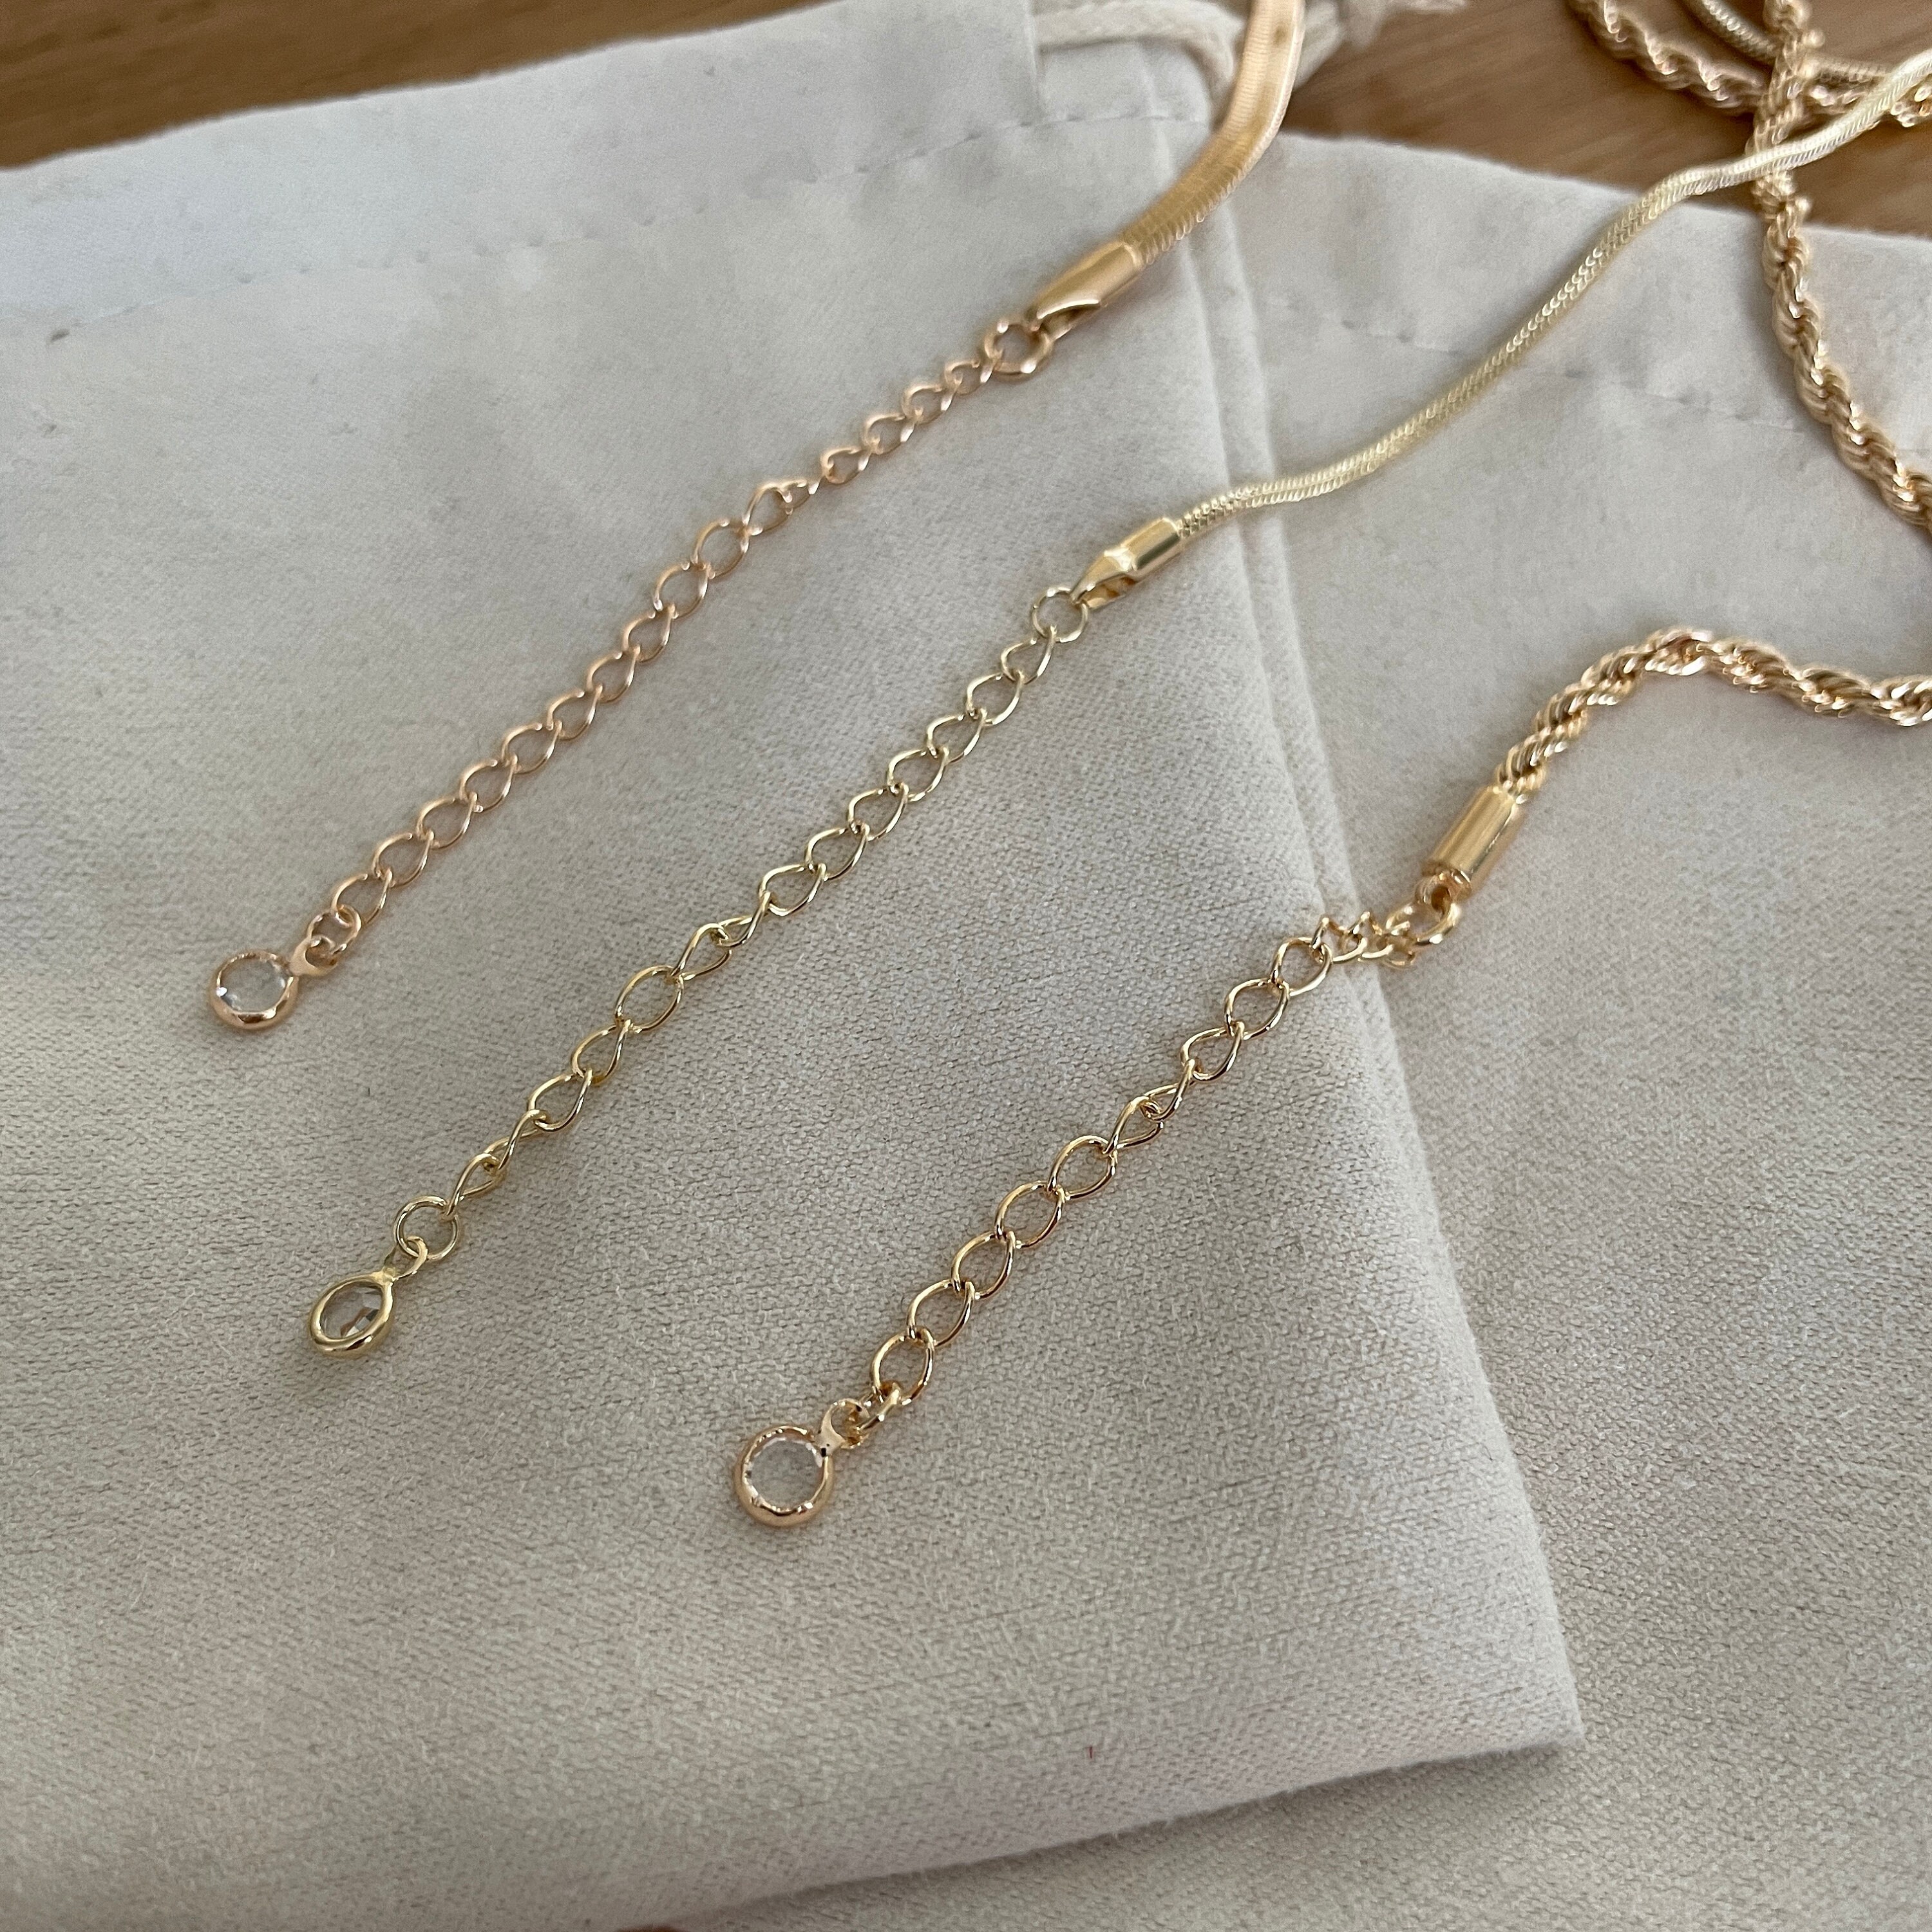 Set of 3 Necklace Gold Herringbone Snake Chain Necklace Rope - Etsy